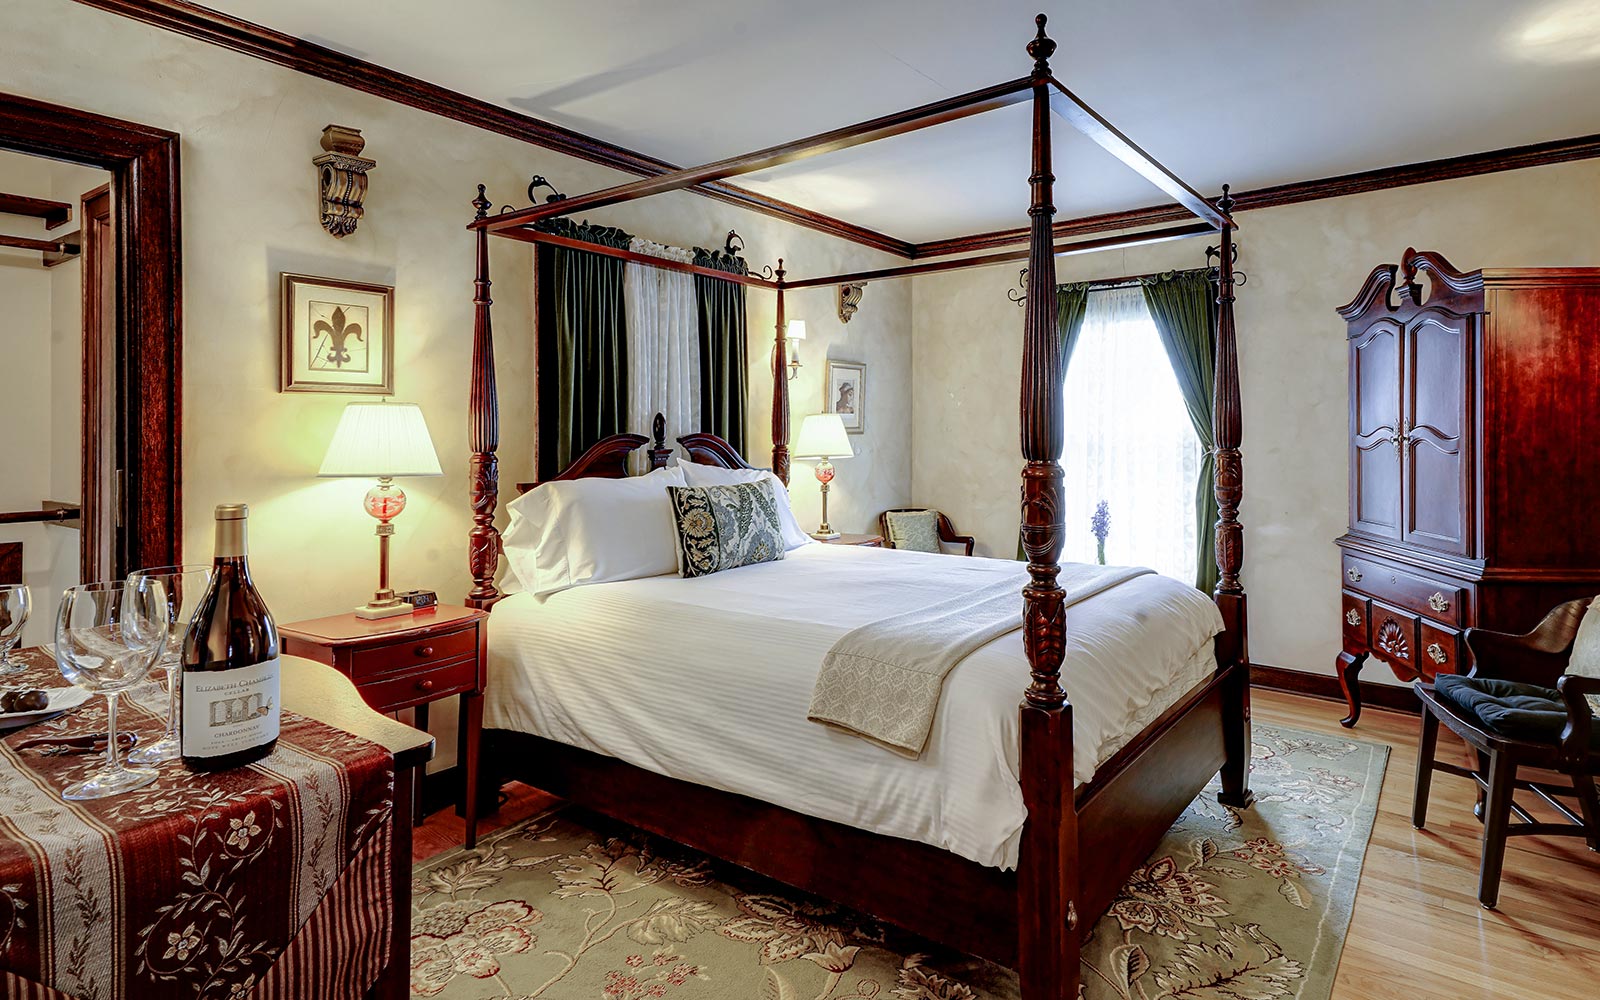 Relax in comfort in this guest room at our Luxury Willamette Valley Bed and Breakfast